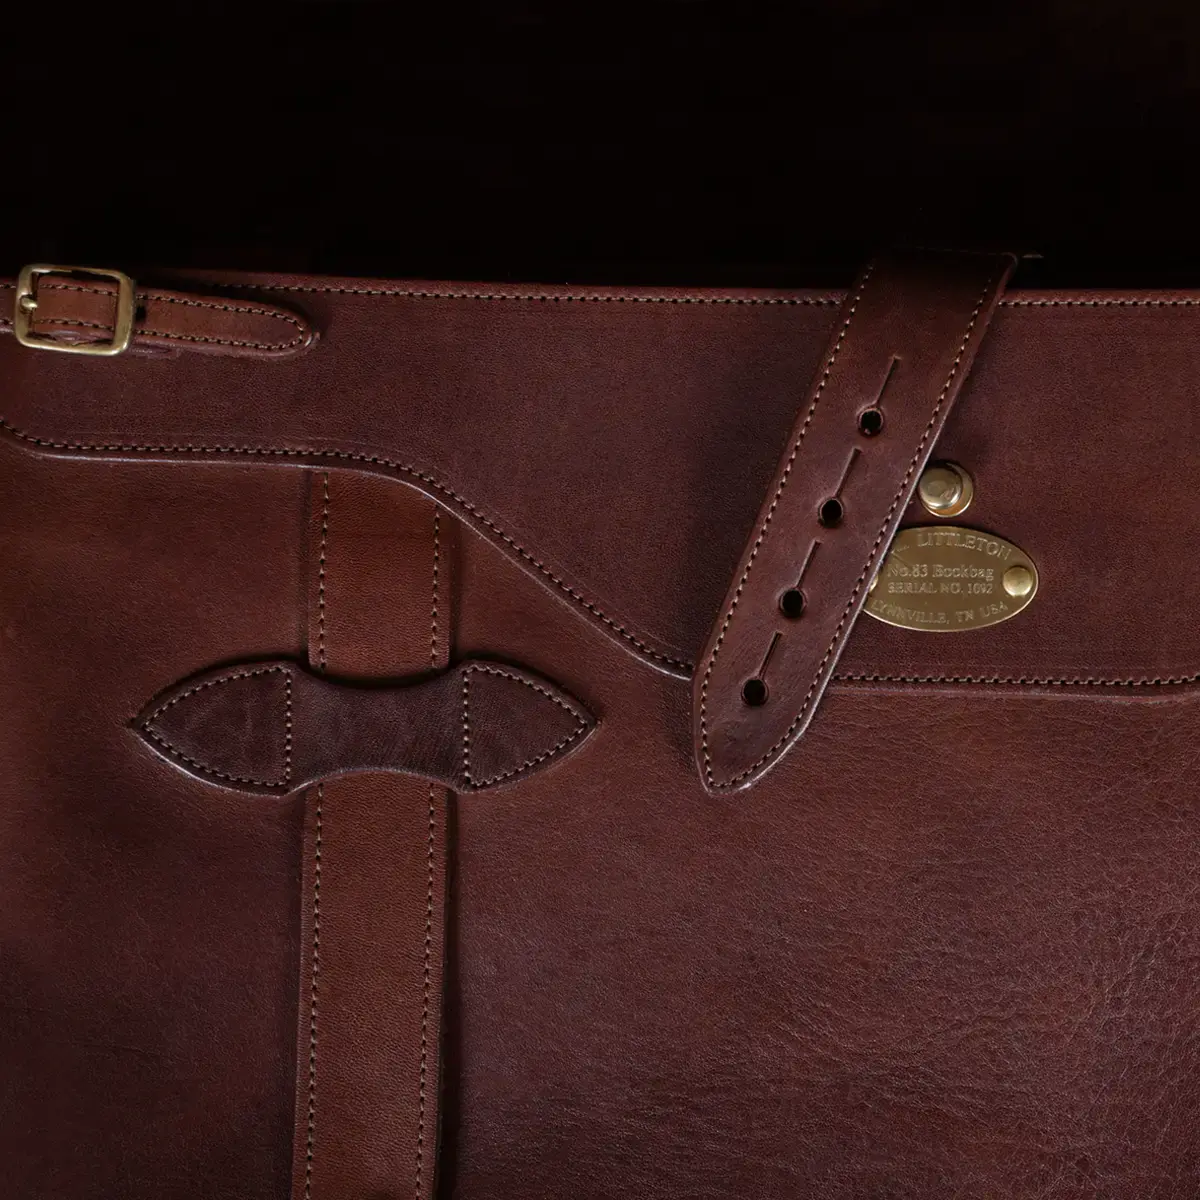 No 83 Messenger book back showing the pull tab unbuttoned